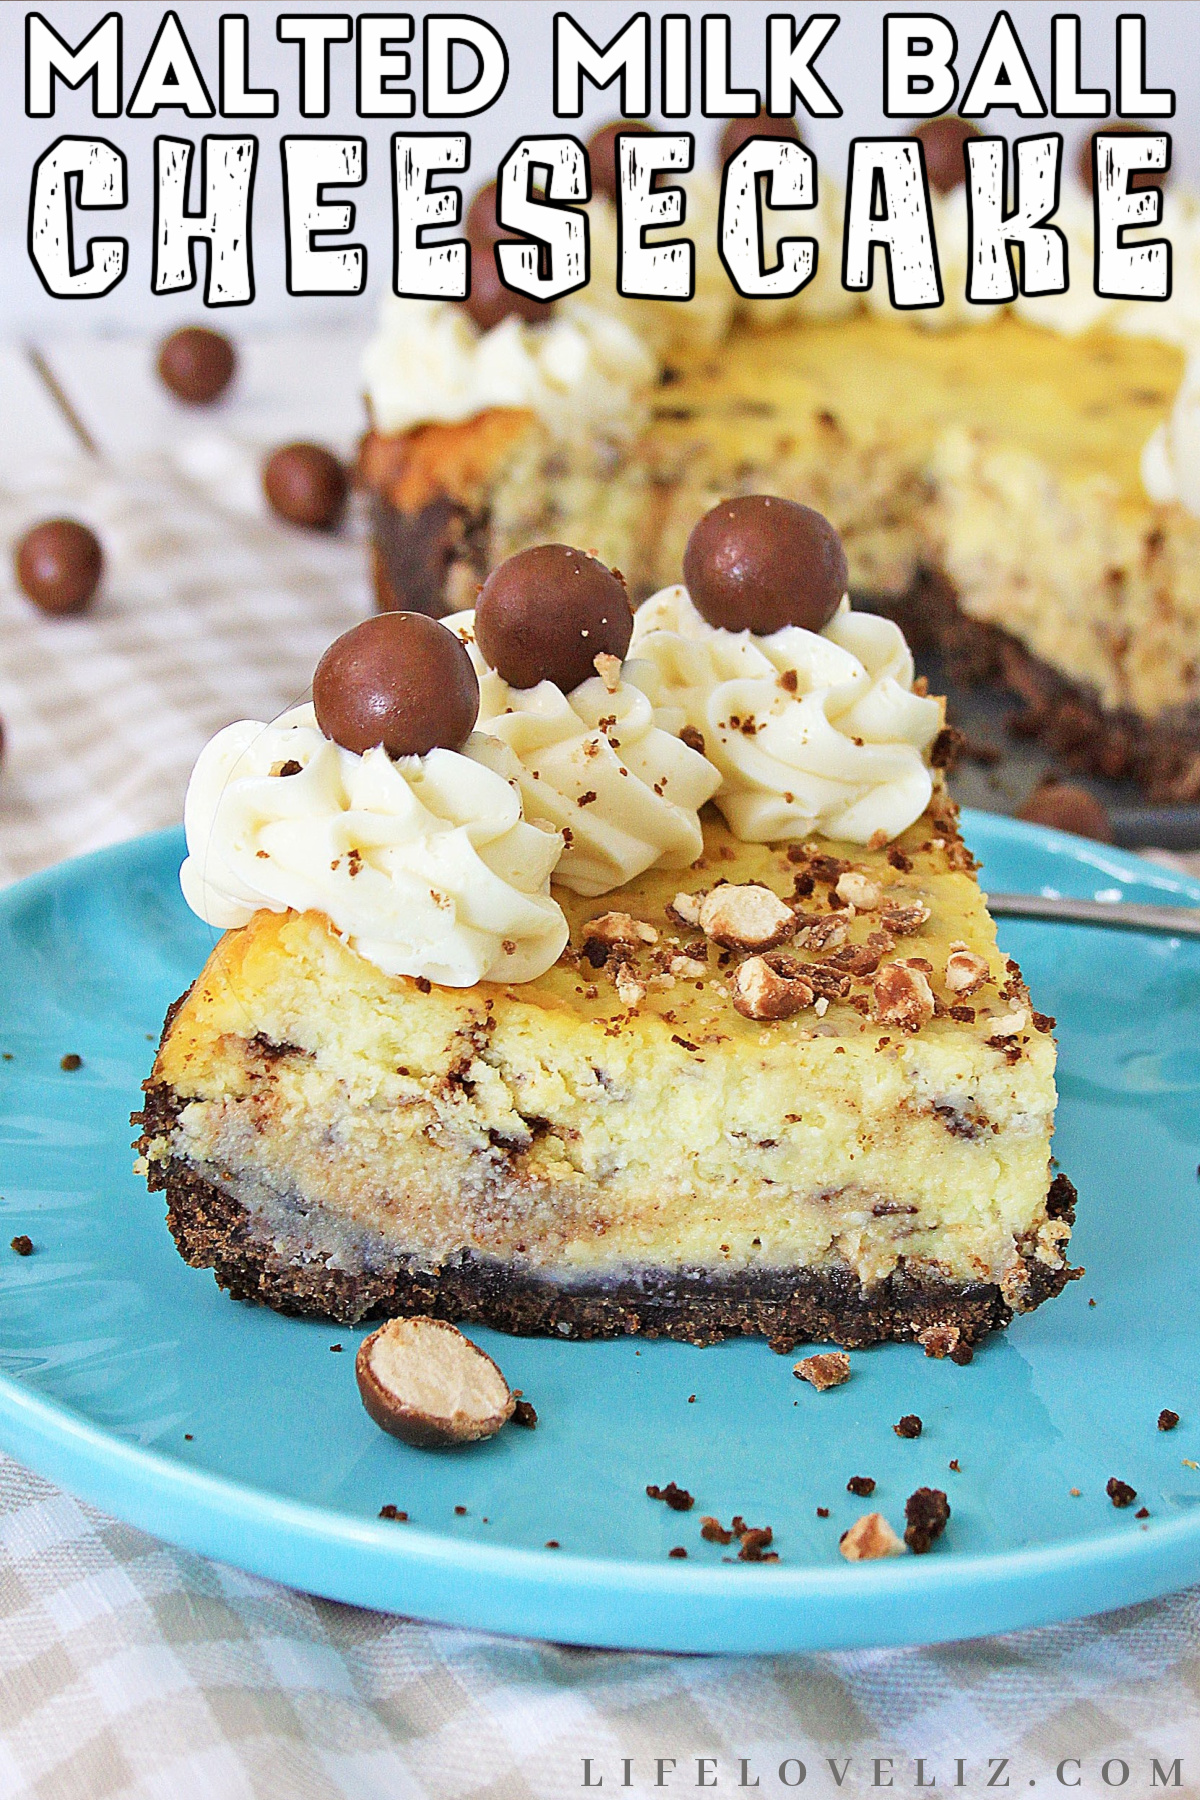 This Instant Pot Malted Milk Ball cheesecake is a creamy and fun dessert filled with whoppers that you can make in less than an hour.